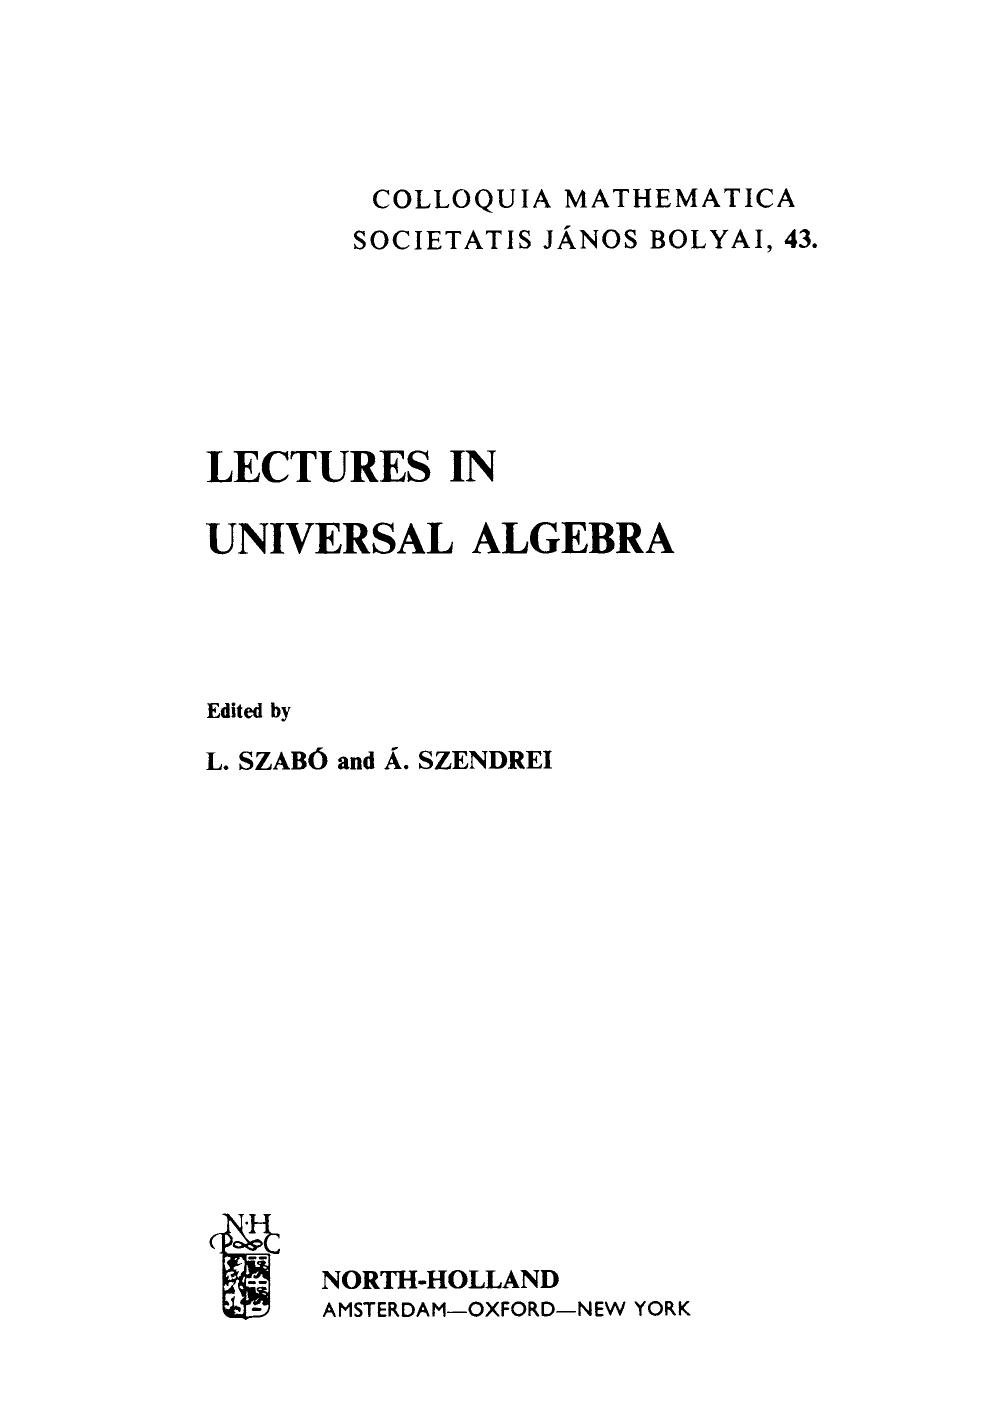 Lectures in Universal Algebra